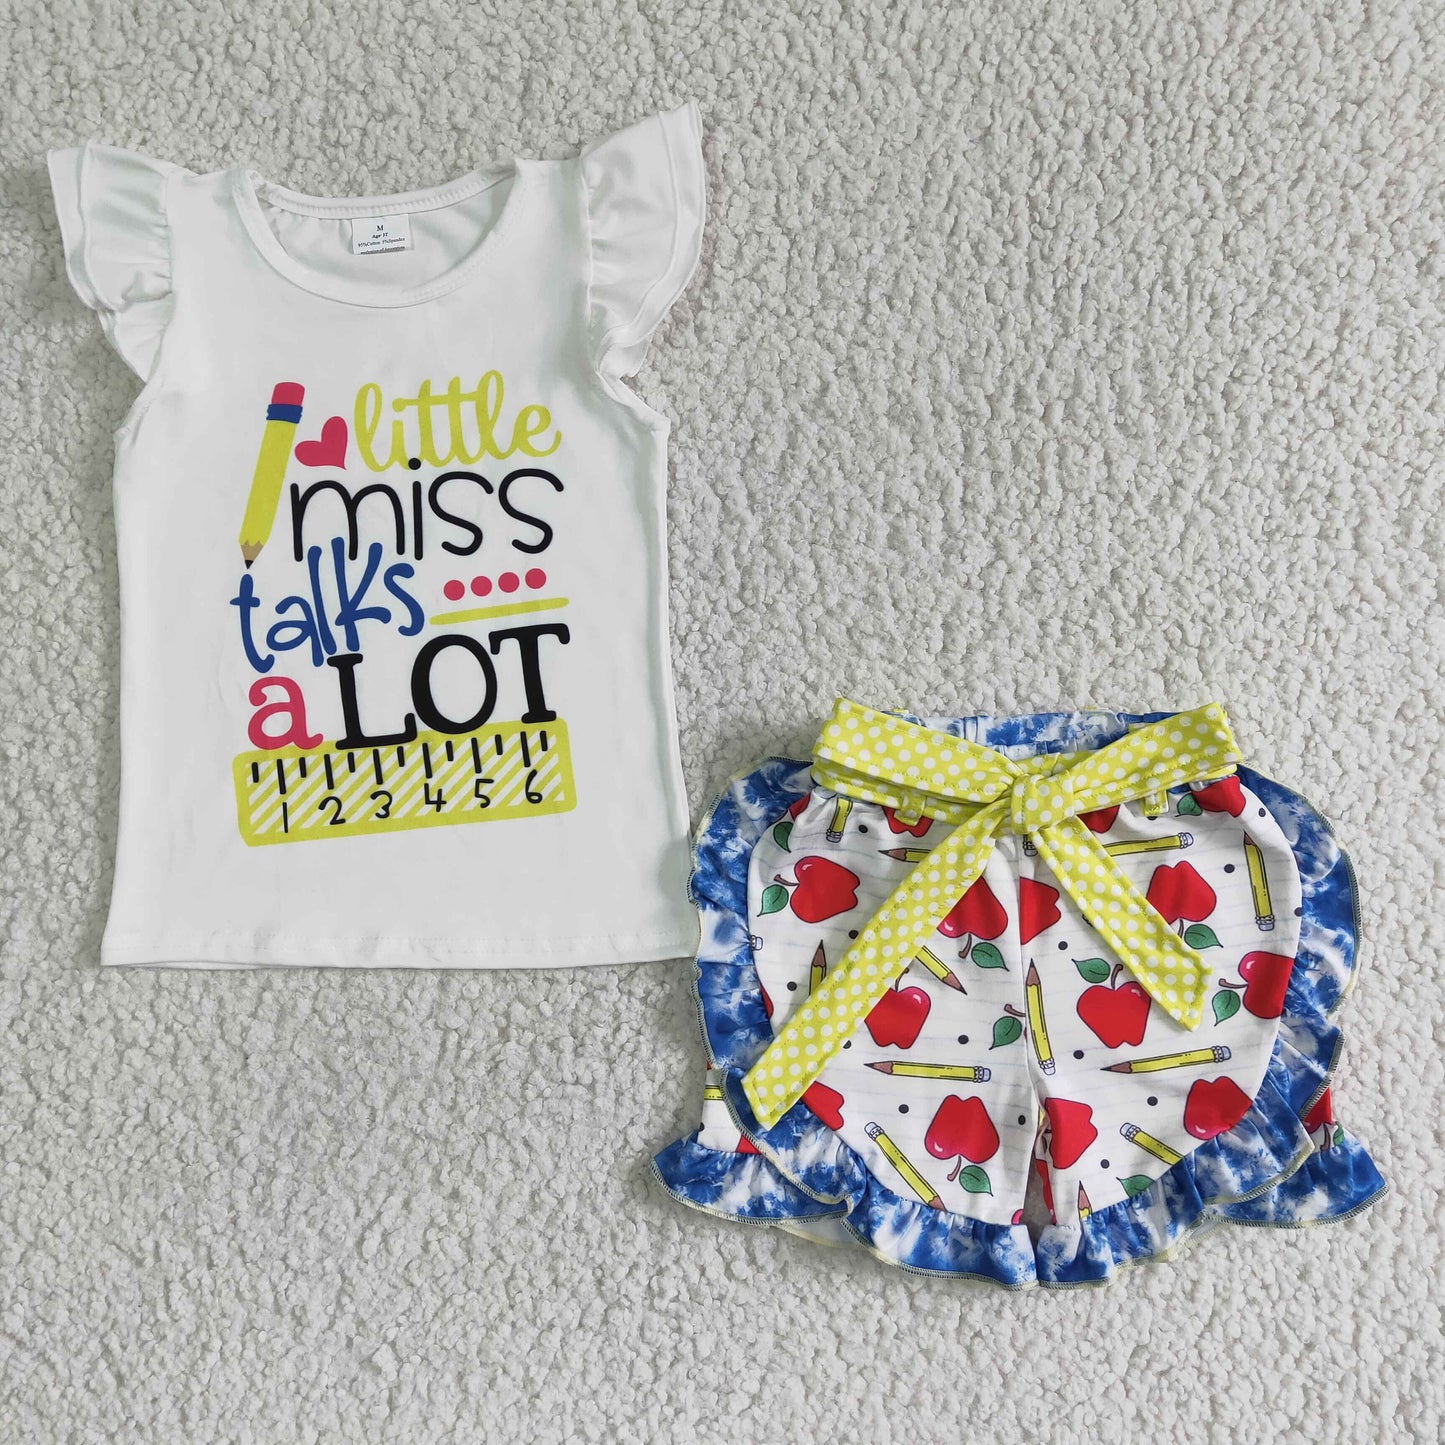 Little miss talks a lot shorts girls back to school clothes